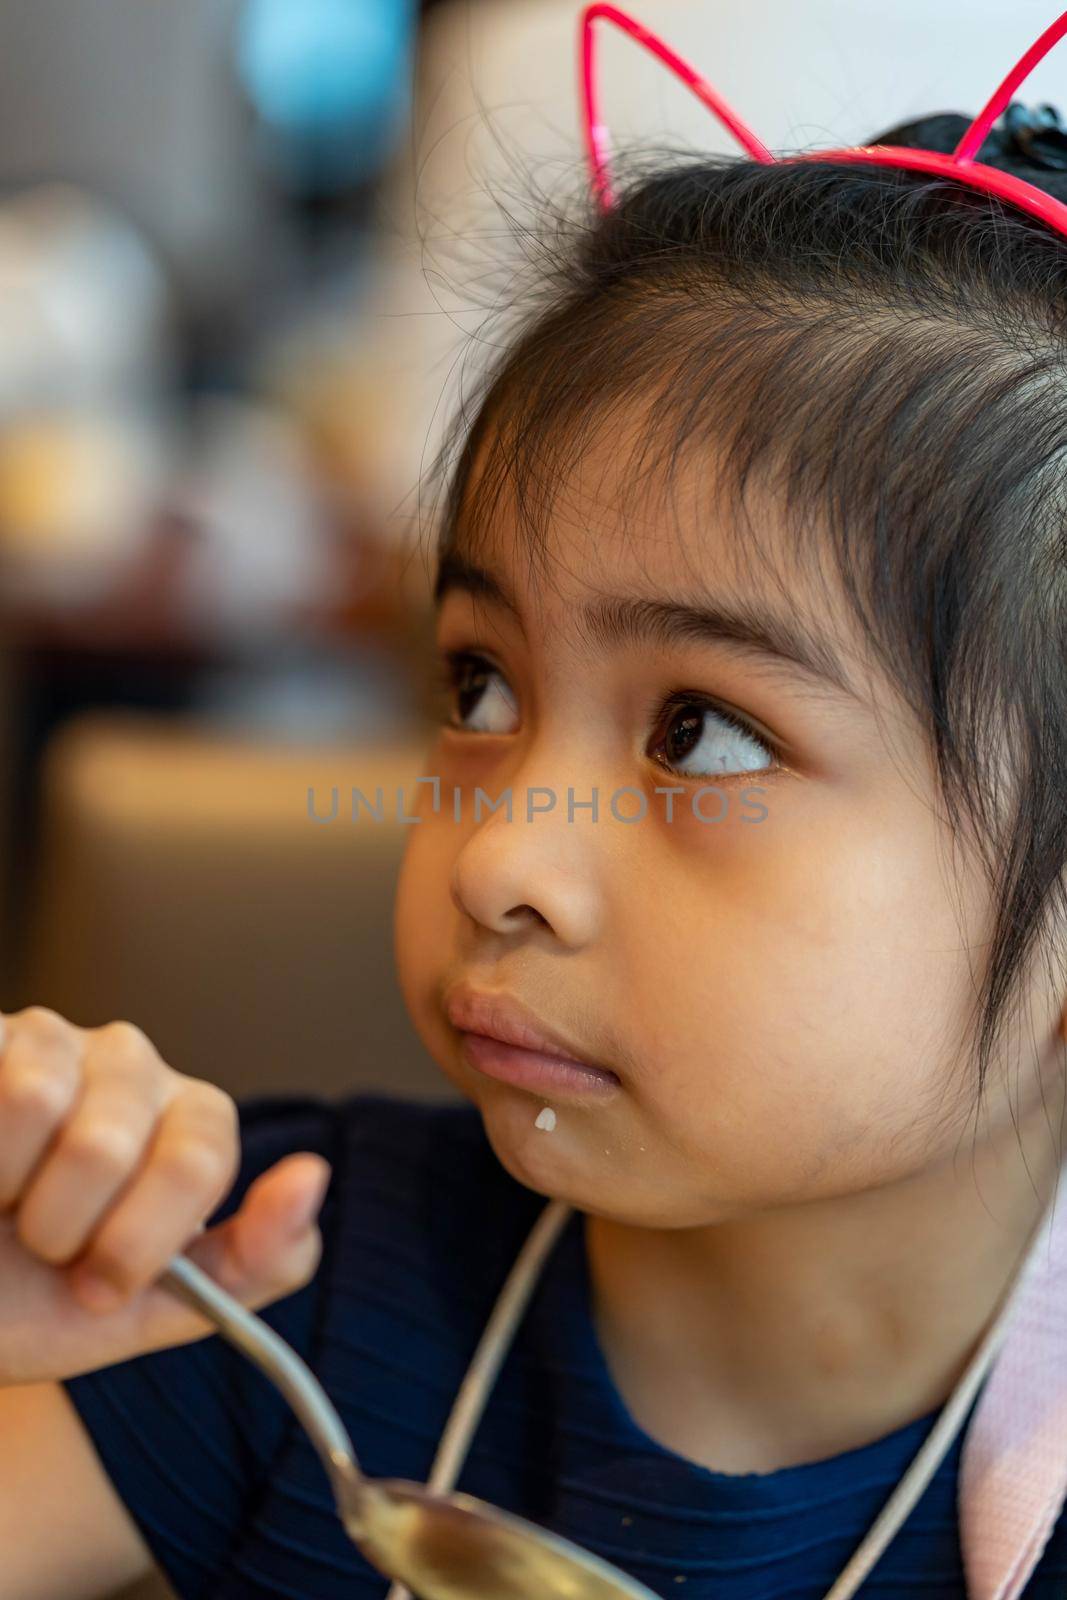 Female asian child while eating rice using spoon. Child enjoys eating rice by her own. Child learning to use spoon and eat by her own by billroque